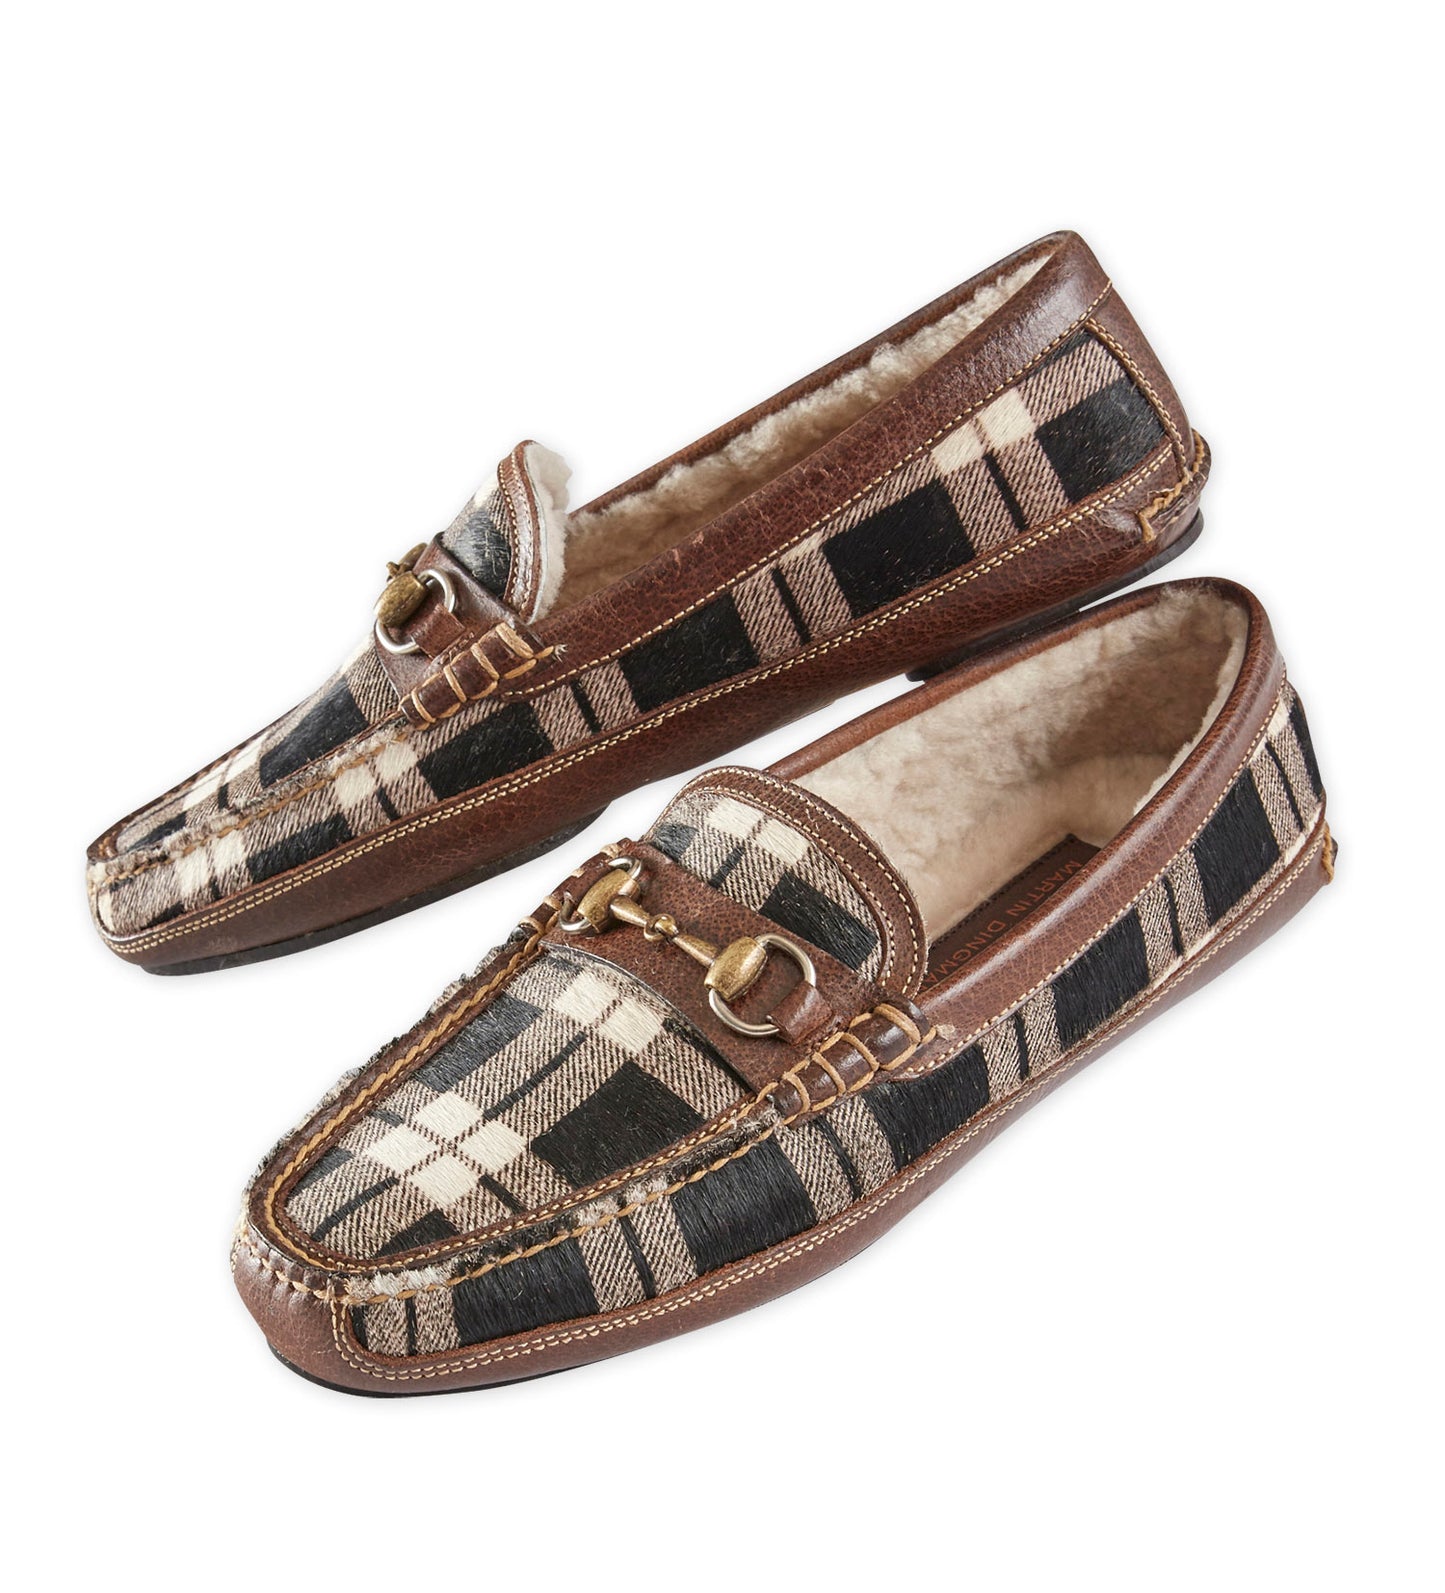 Martin Dingman Cozy Country Plaid Hair-On-Hide Slippers